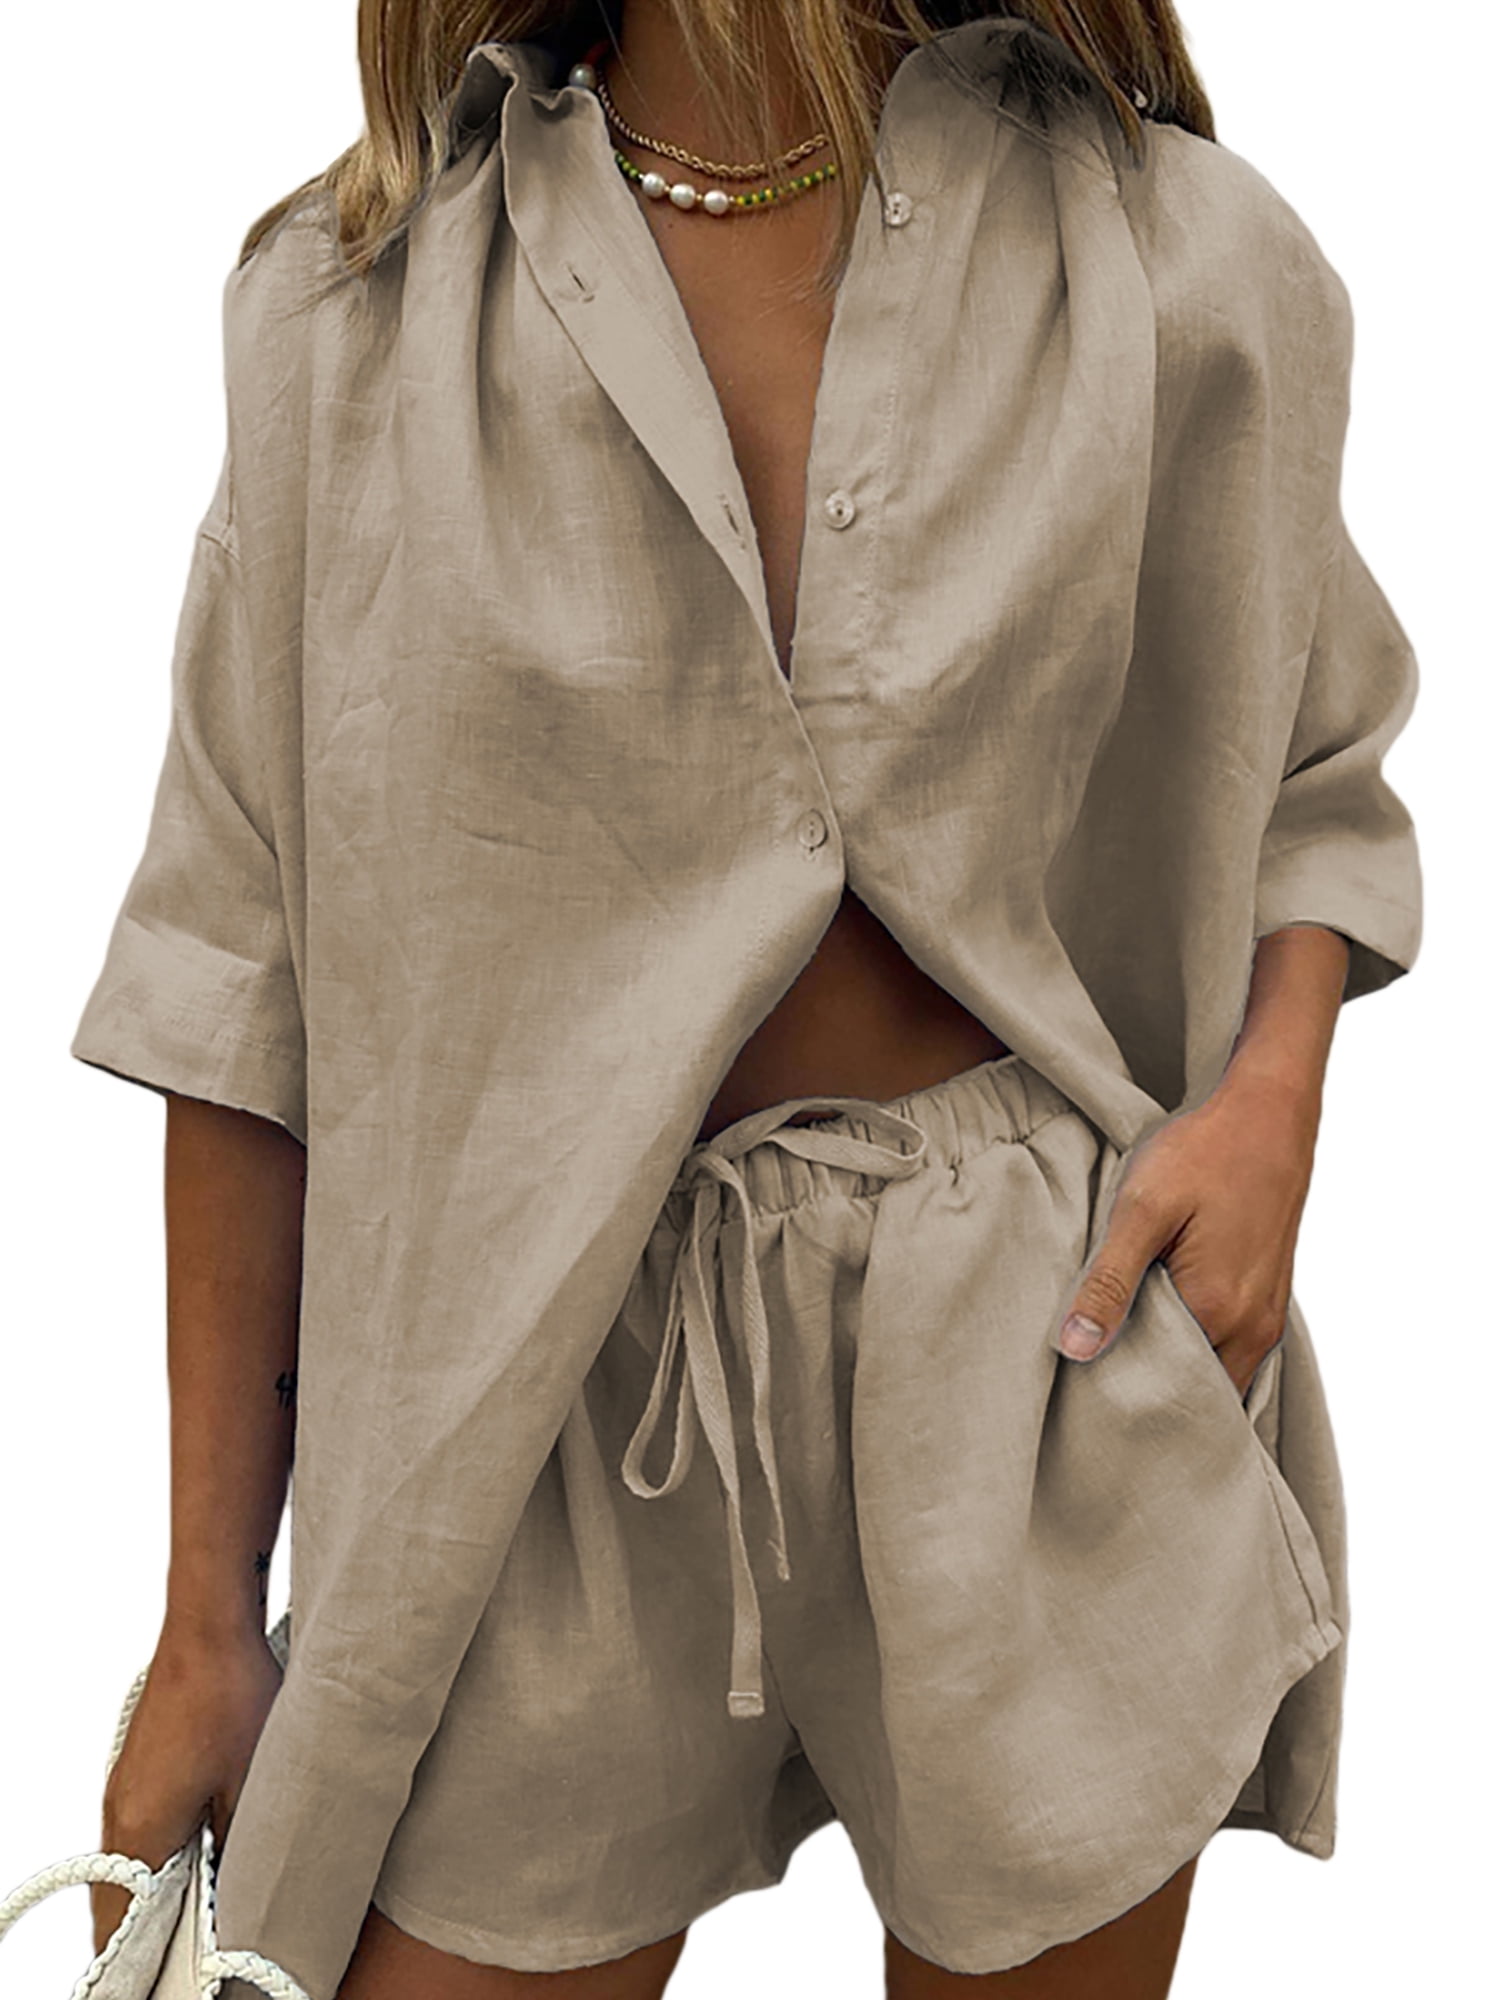 Women's Linen Casual 2 Piece Outfit Set Oversized Shirt + Shorts with  Pockets 